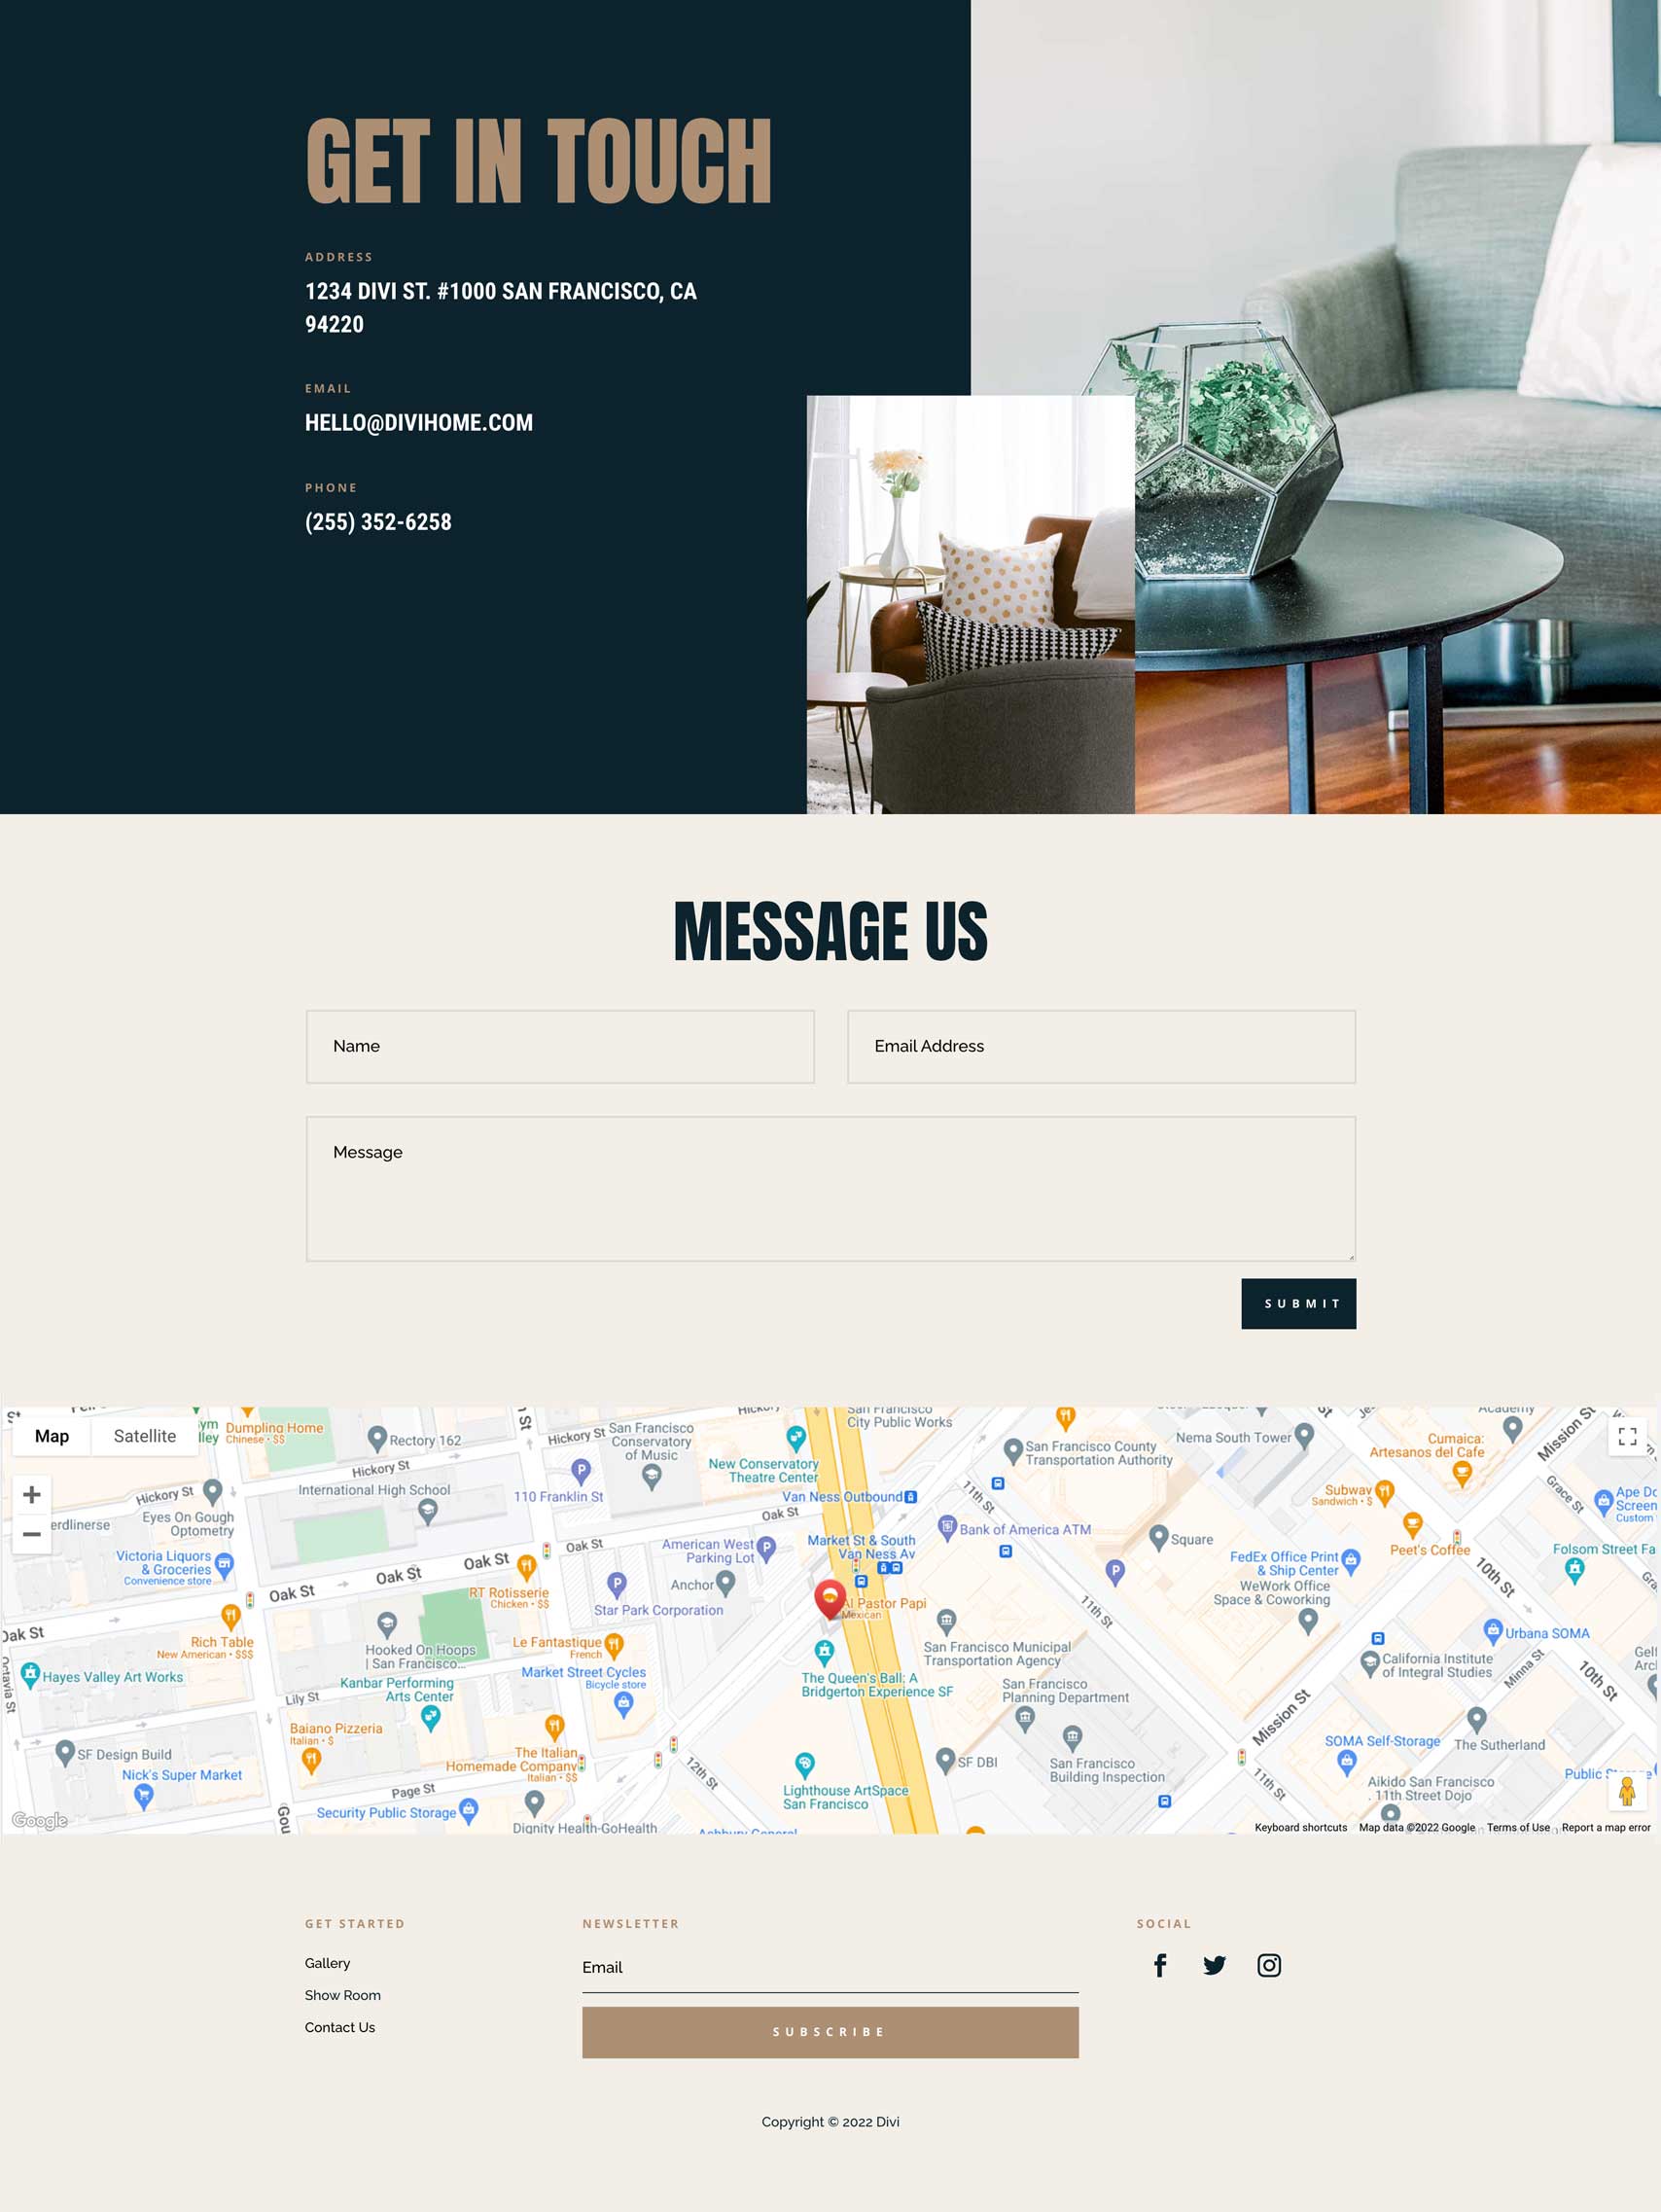 Home Remodeling Layout Pack for Divi